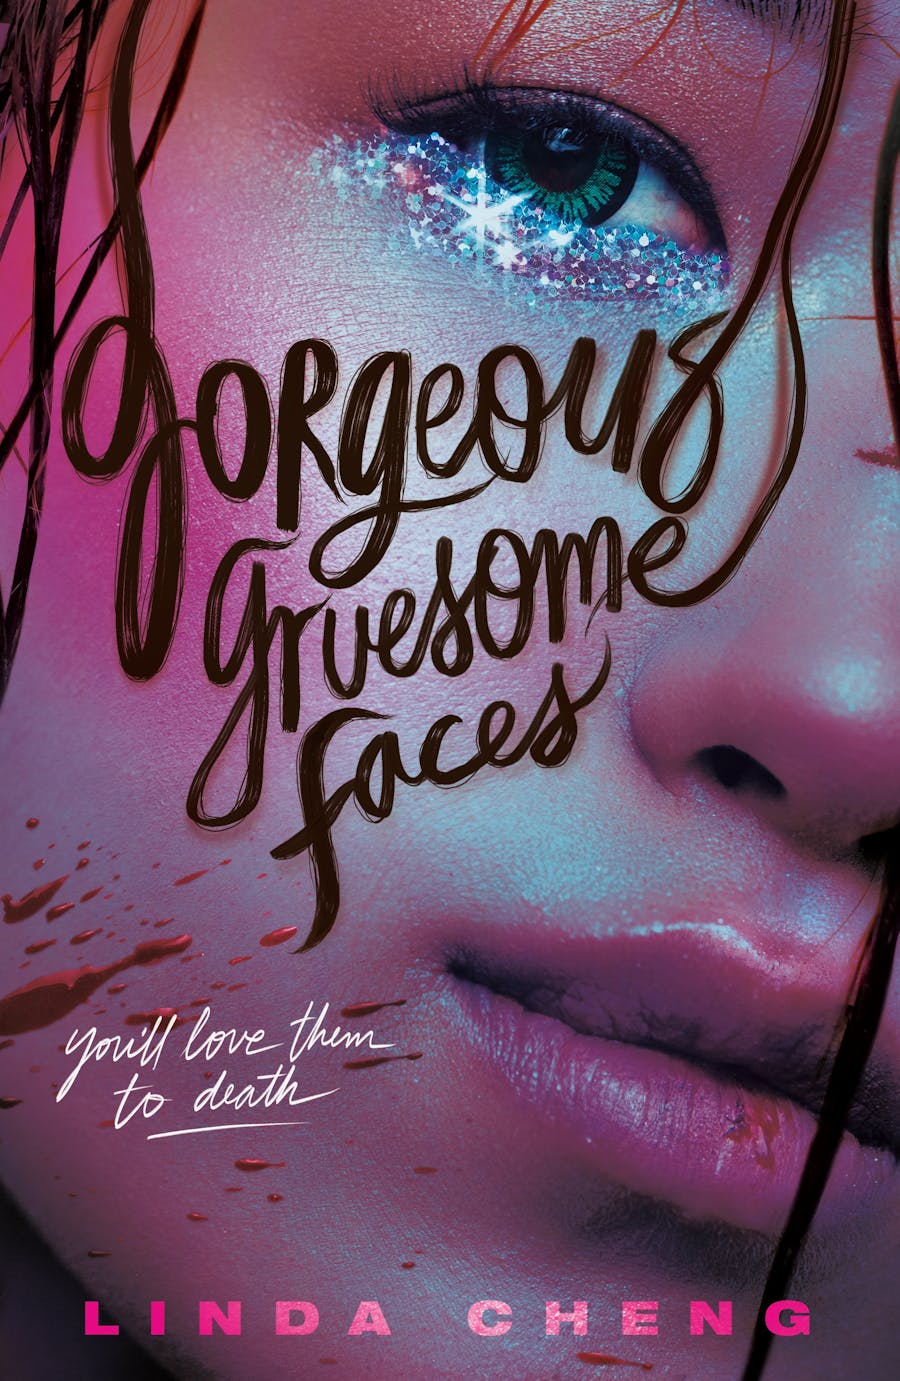 cover of Gorgeous Gruesome Faces by Linda Cheng